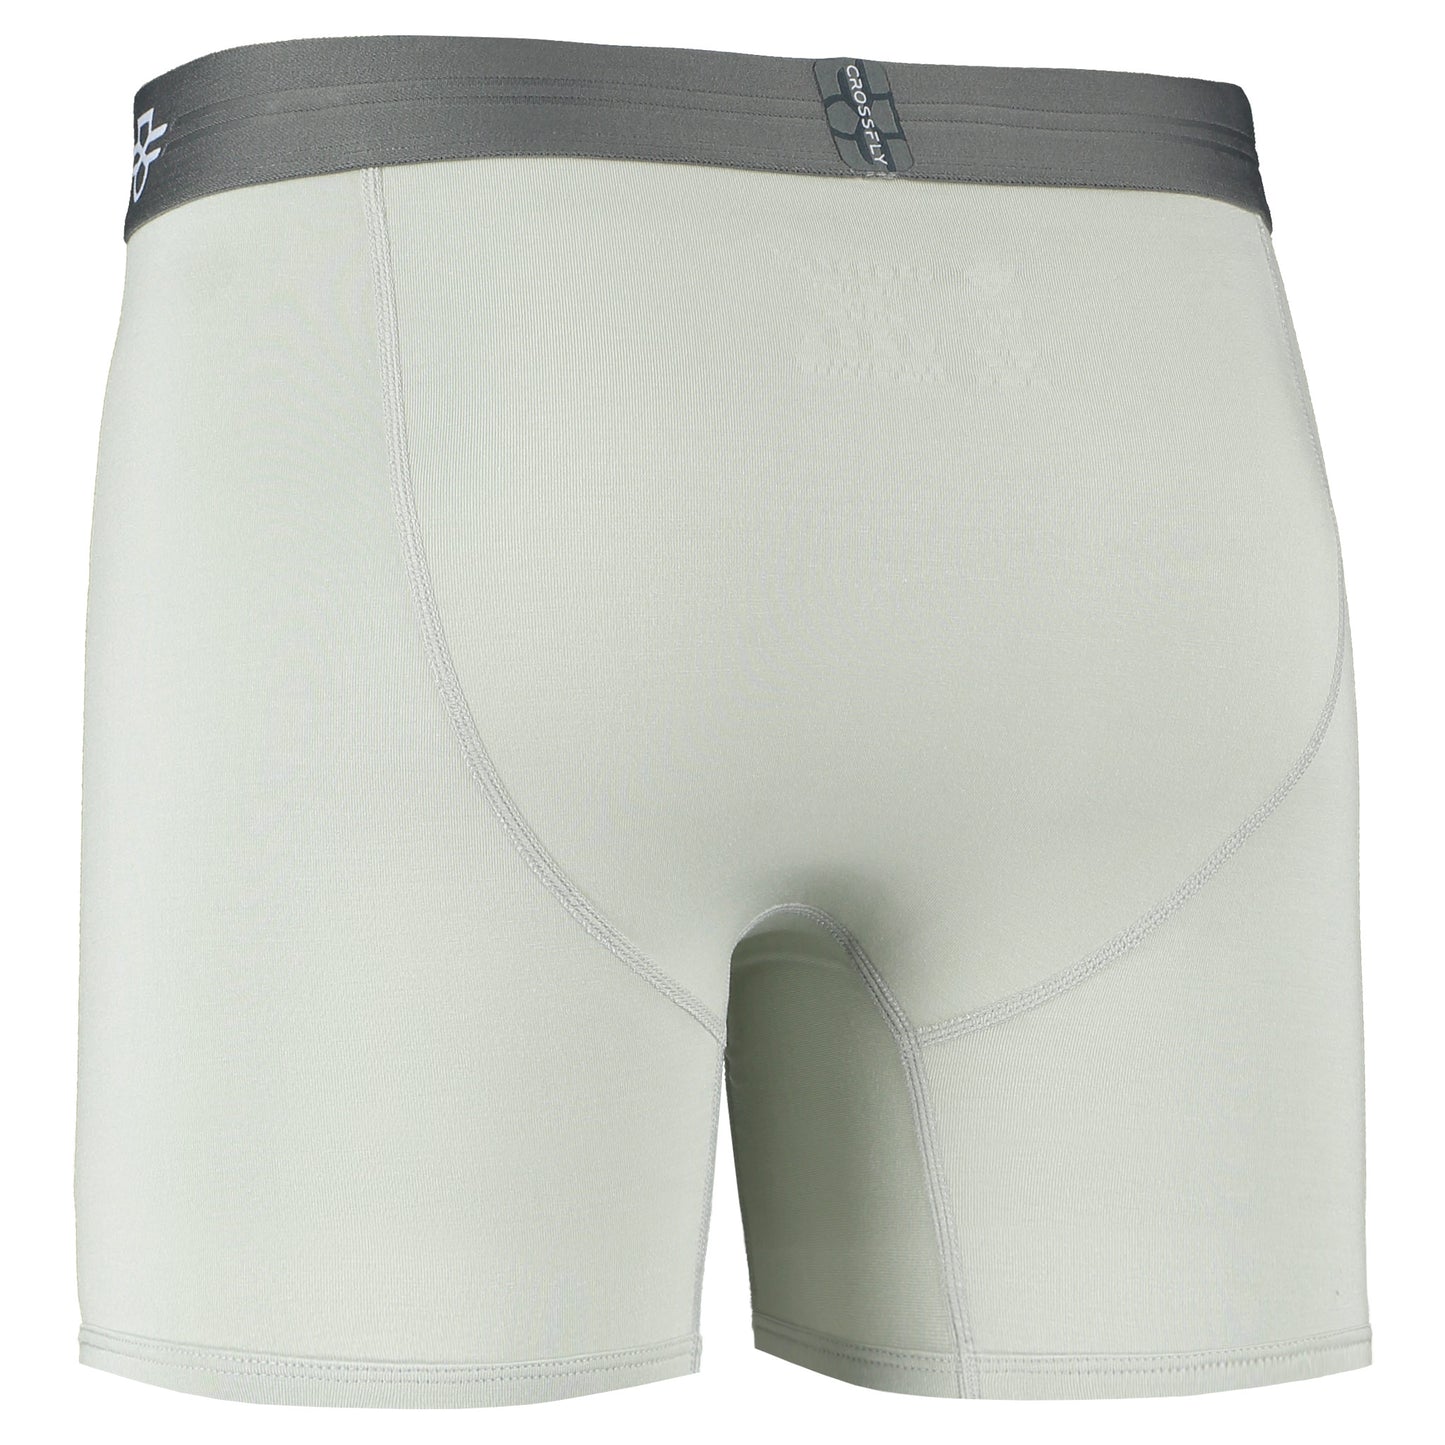 Crossfly men's IKON X 6" silver / charcoal boxers from the Everyday series, featuring X-Fly and Coccoon internal pocket support.